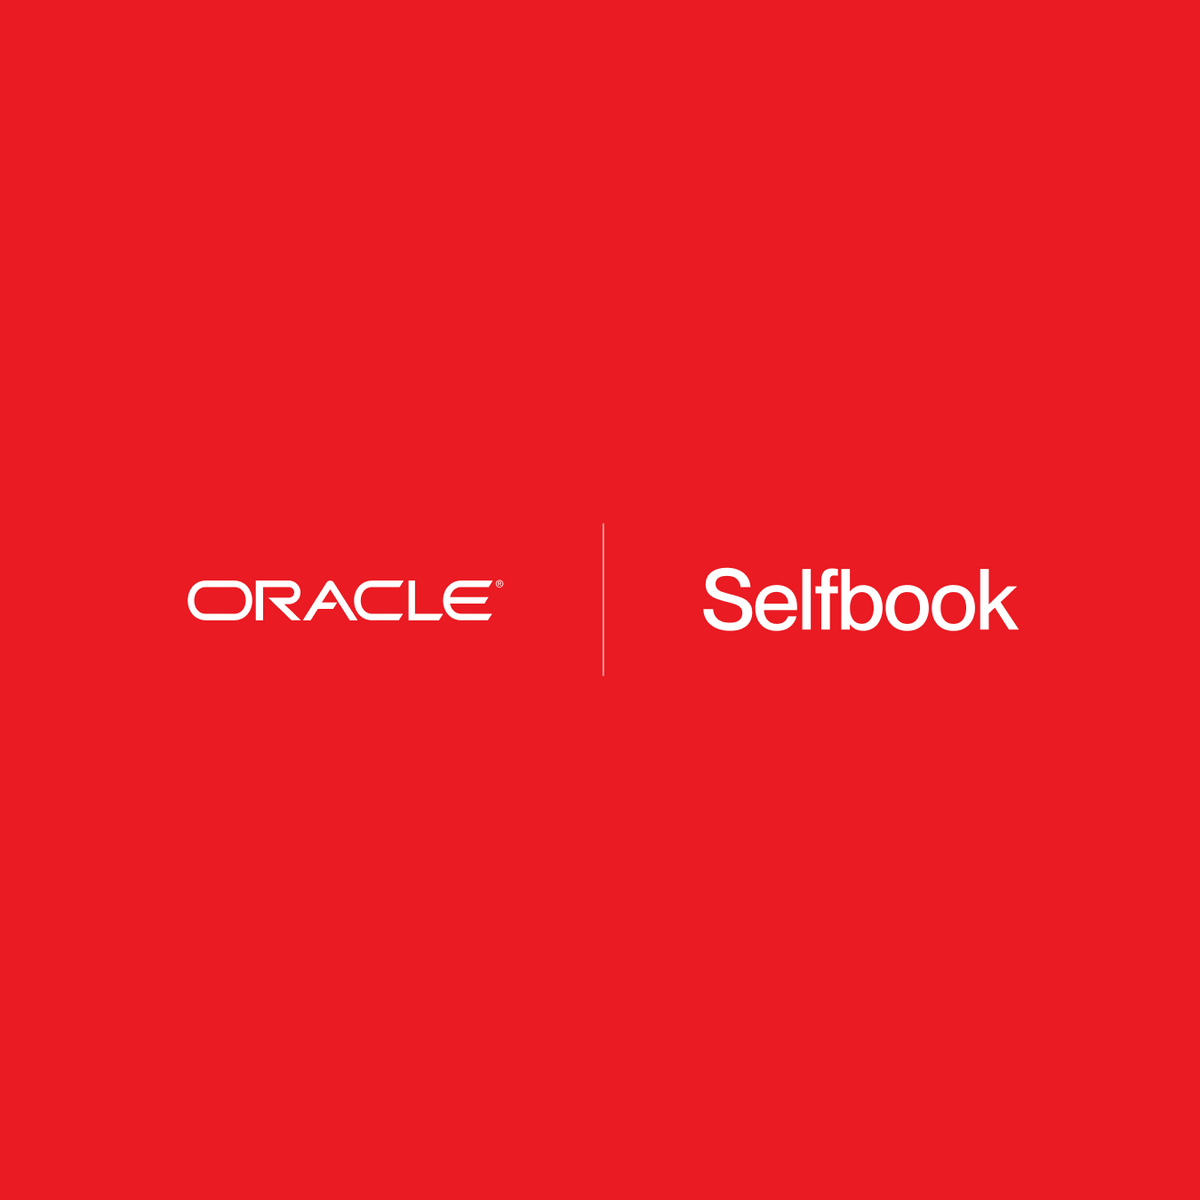 Selfbook Now Available on Oracle Cloud Marketplace